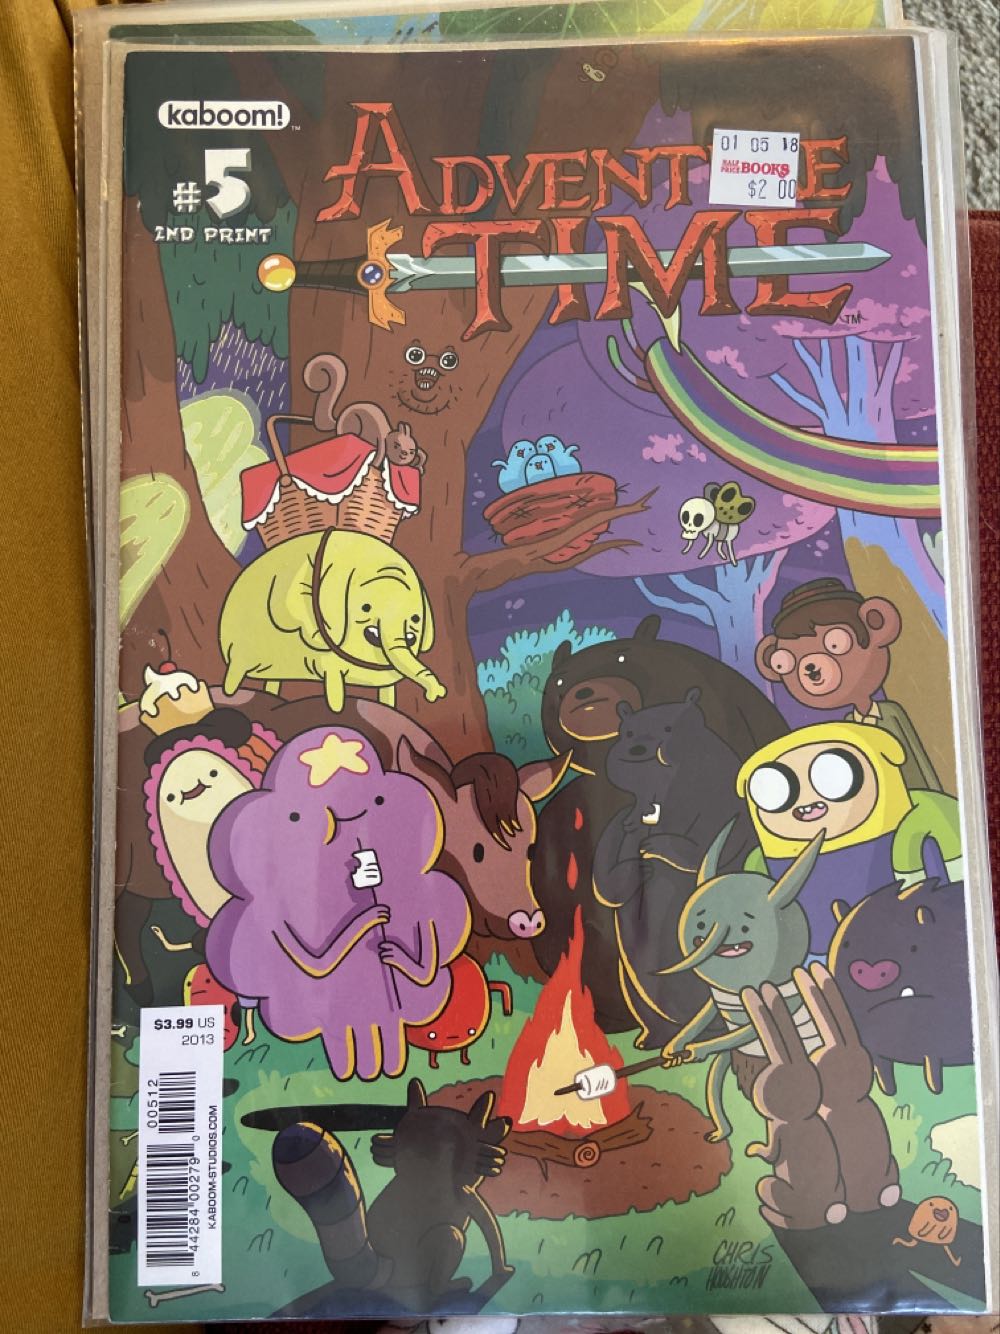 Adventure Time #5 2nd Print - Kaboom! (5) comic book collectible [Barcode 84428400279000512] - Main Image 1